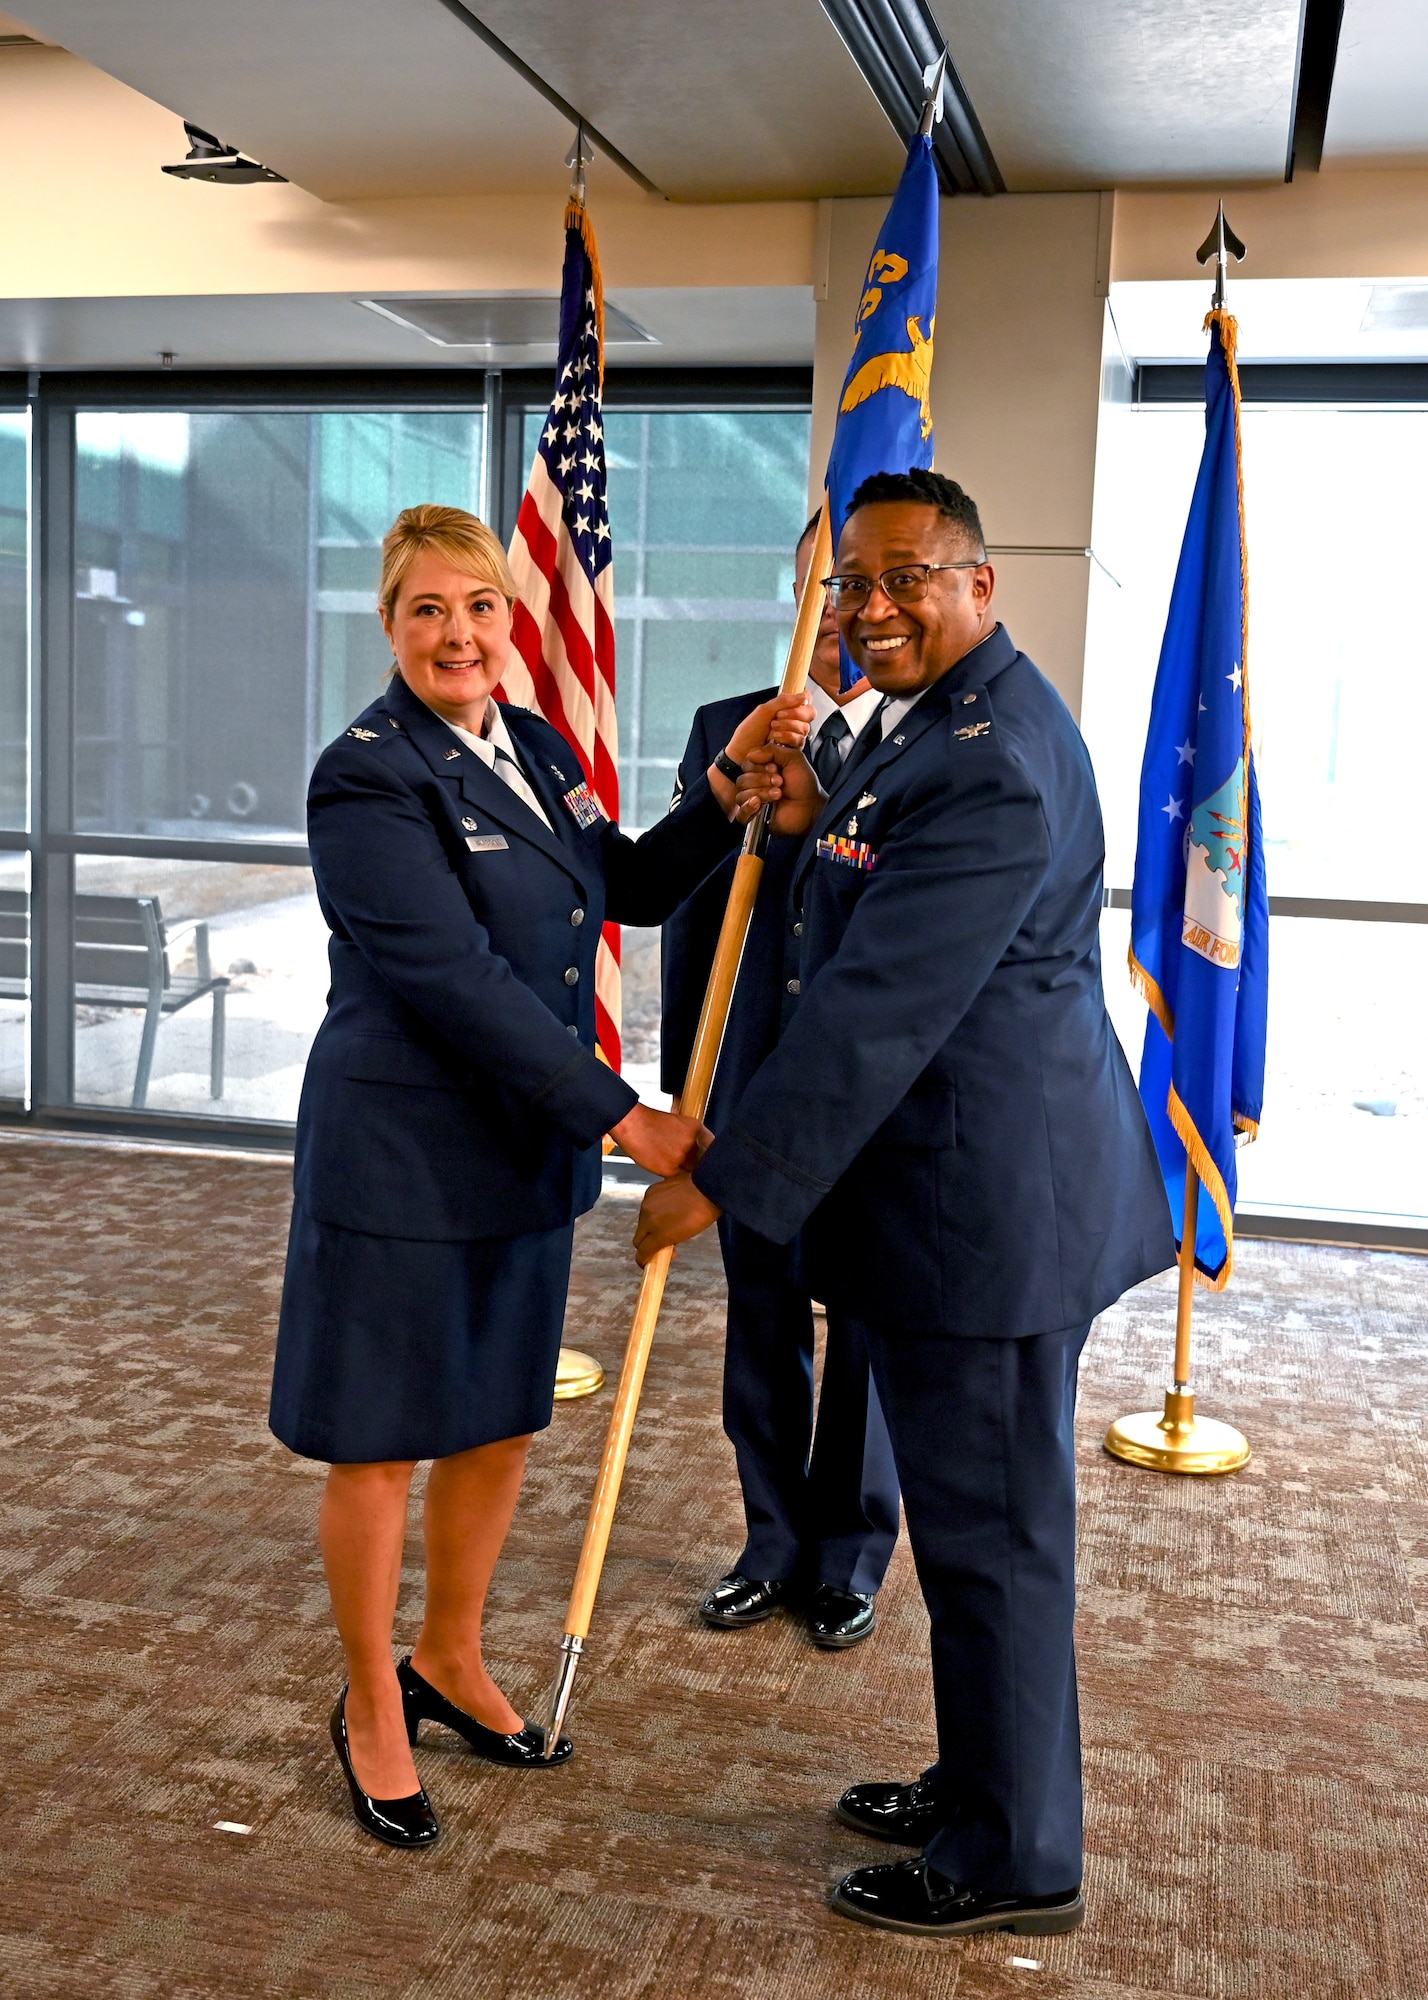 Col. Michelle Van Sickle, 433rd Medical Group commander, presents the leadership guidon to Col. Alvin Bradford, 433rd Medical Squadron commander, Oct. 16, 2022, during the 433rd MDS assumption of command ceremony at Joint Base San Antonio-Lackland, Texas. (U.S. Air Force photo by Staff Sgt. Monet Villacorte)